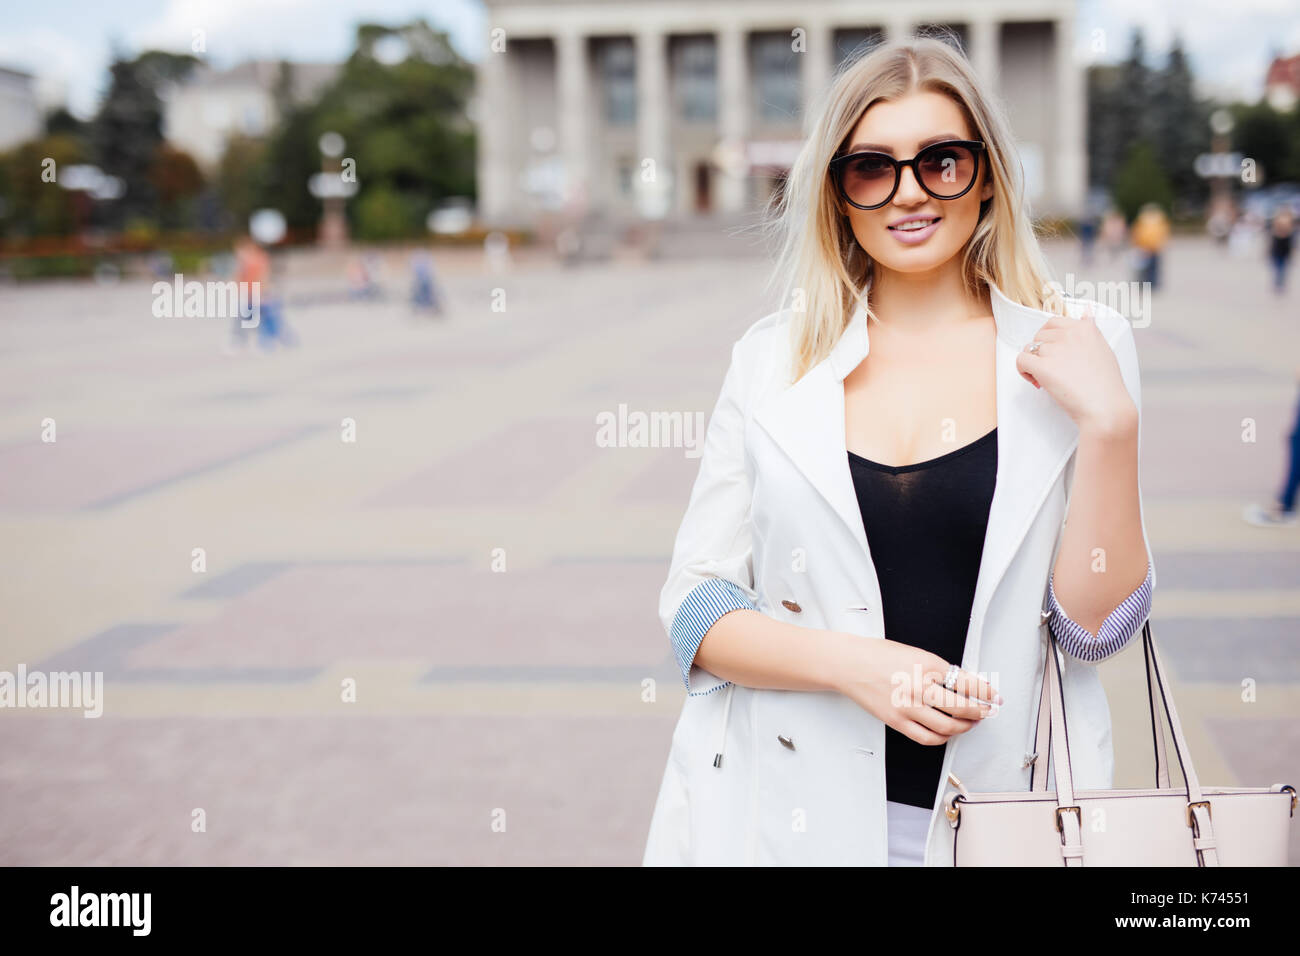 Attractive woman standing in an urban square in front of a large historic building looking at the camera with a warm friendly smile with copy space. Stock Photo